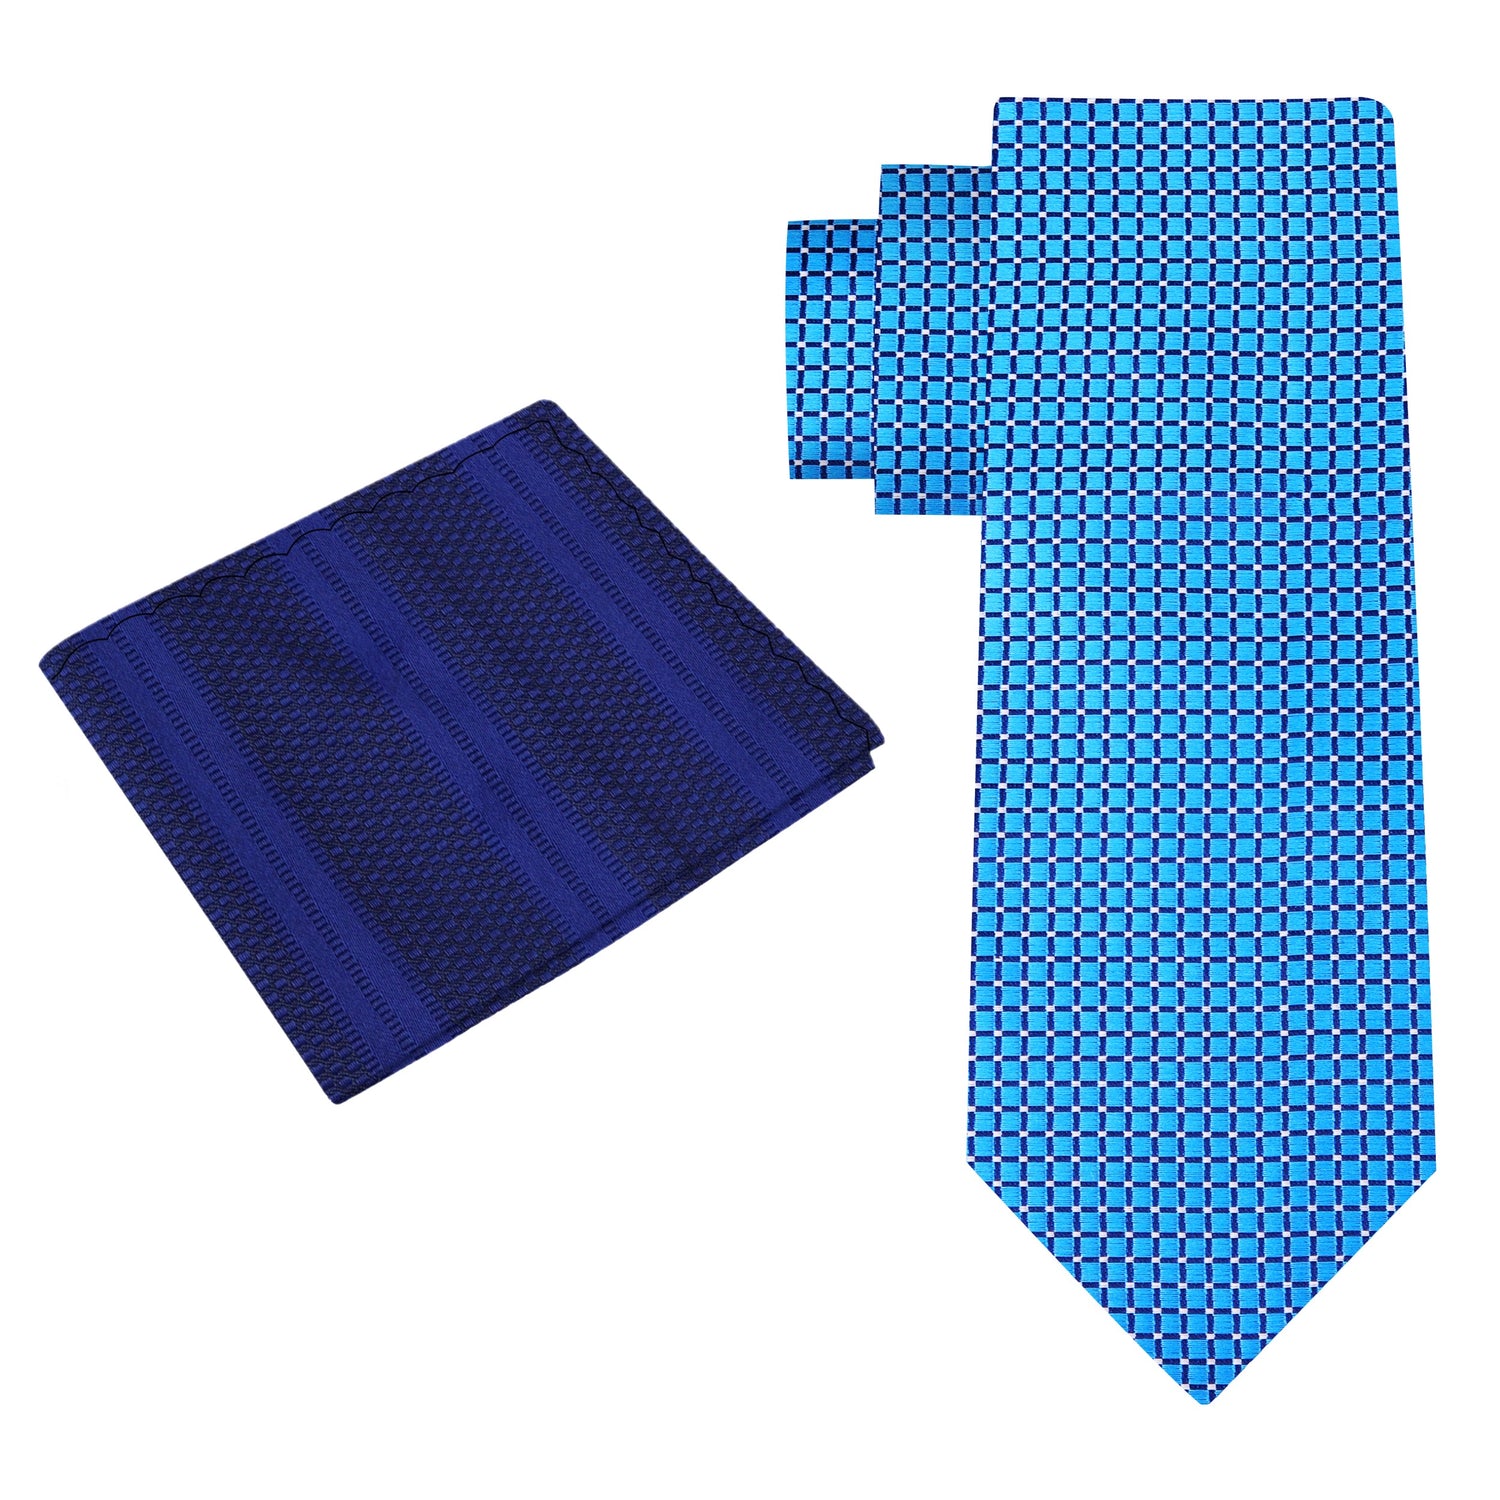 Alt View: A Light Blue Small Geometric Diamond With Small Dots Pattern Silk Necktie With Dark Blue Pocket Square